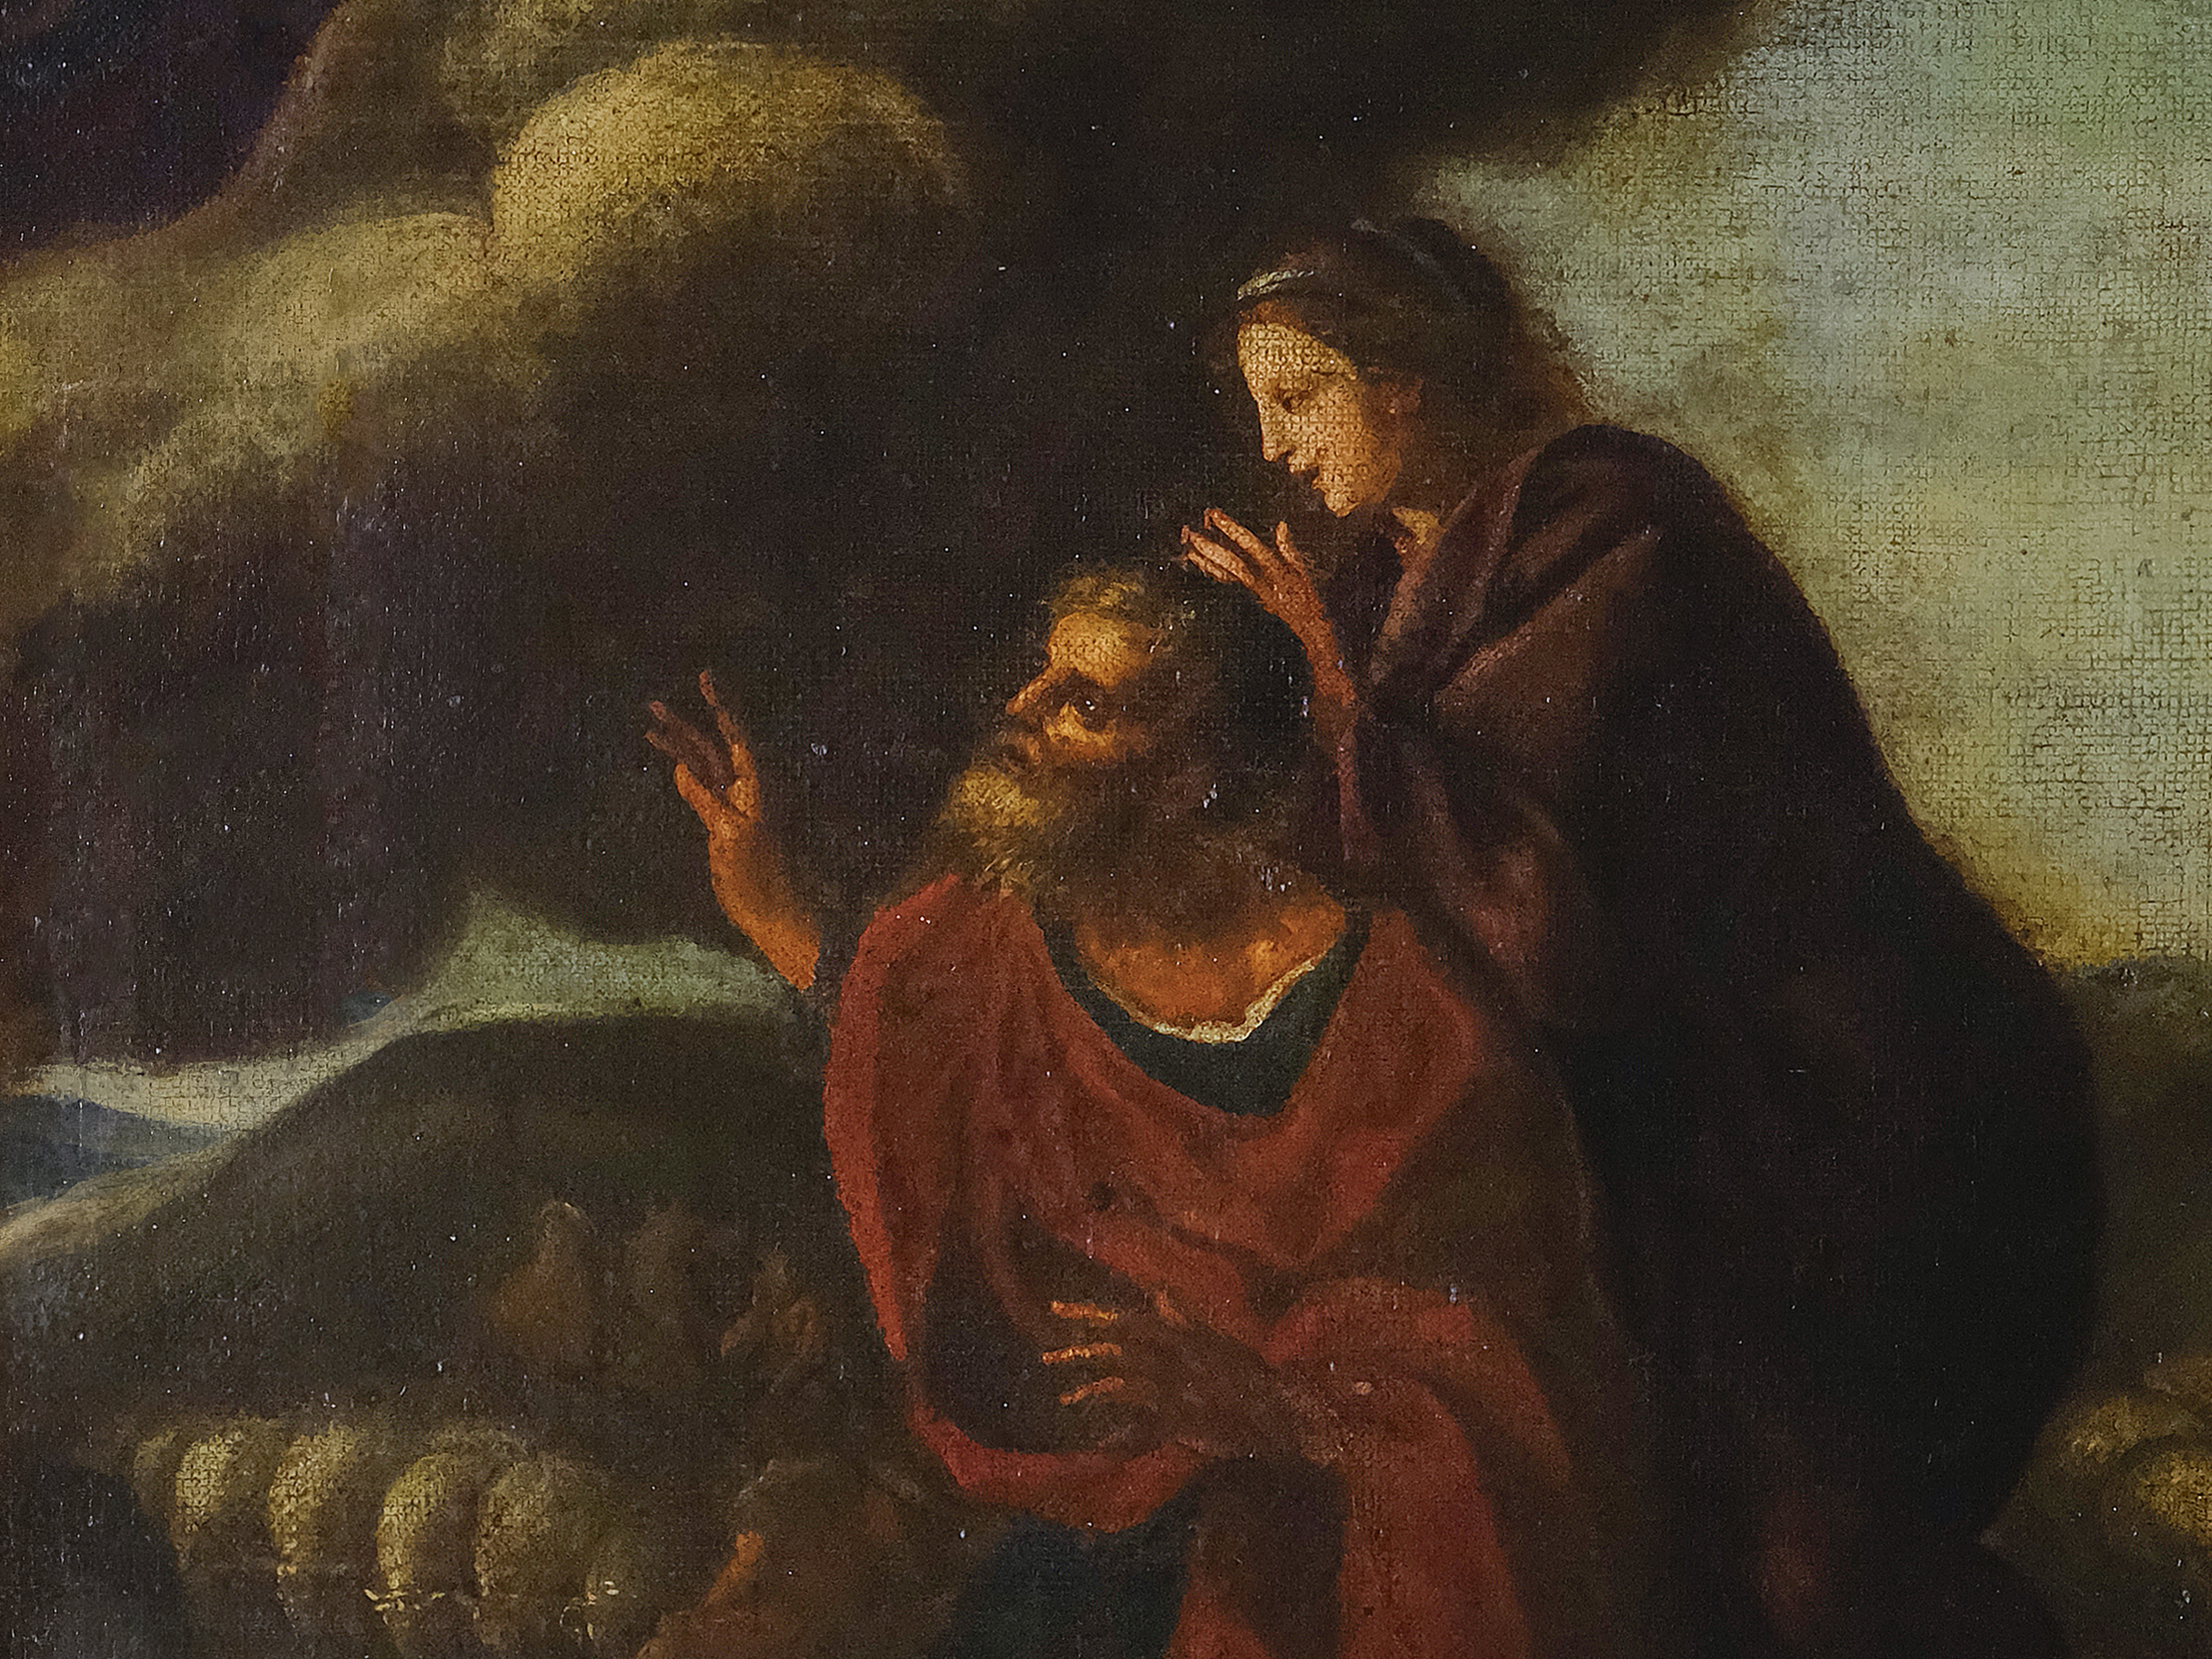 Noah's Offering after the Flood, 17th century - Image 4 of 6